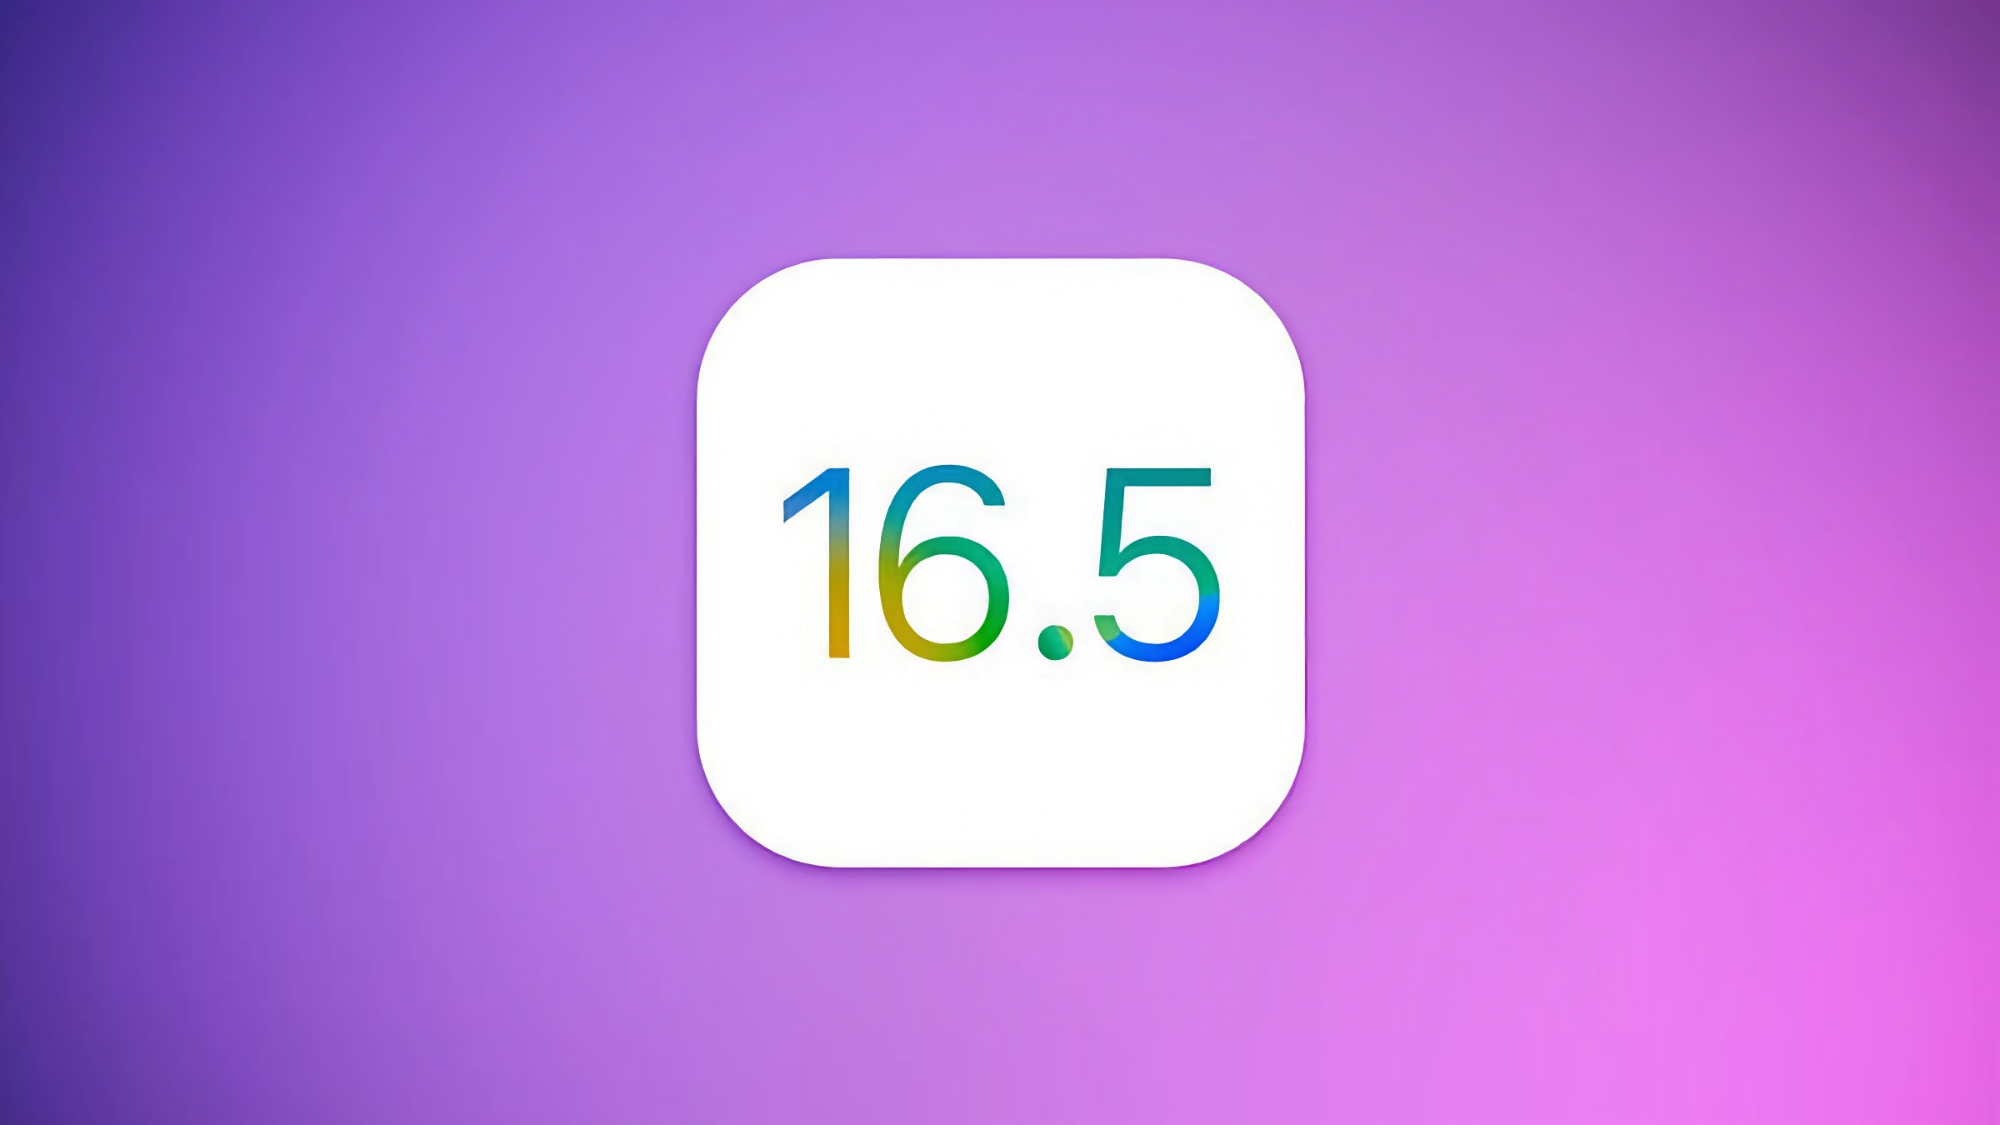 Apple releases first beta version of iOS 16.5